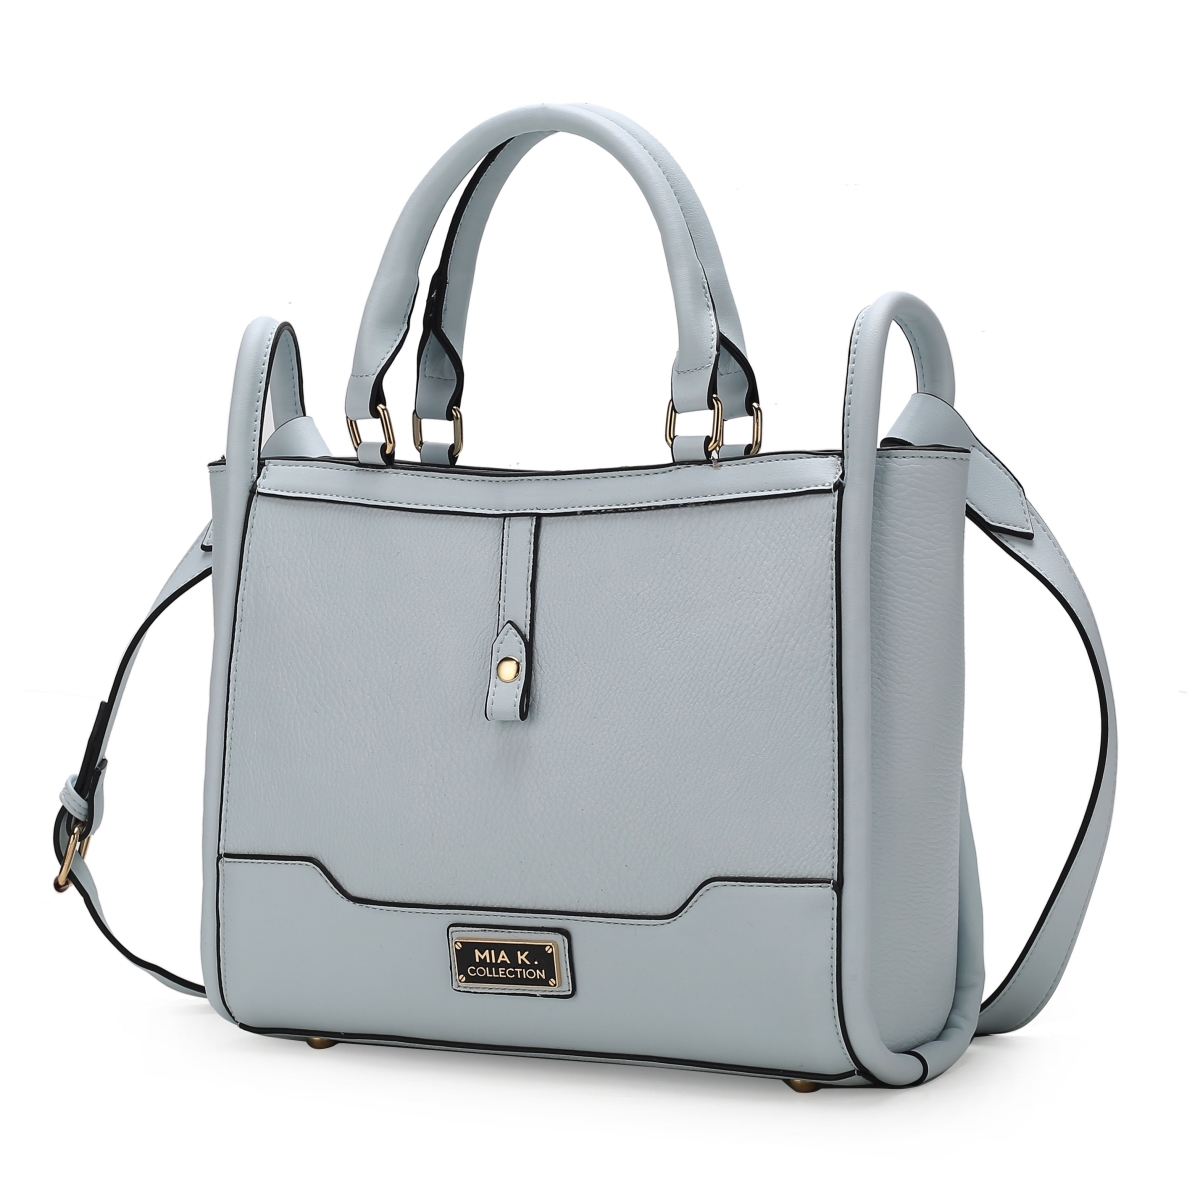 Picture of MKF Collection by Mia K. MKF-L173LBLU Melody Vegan Leather Women&apos;s Tote Handbag